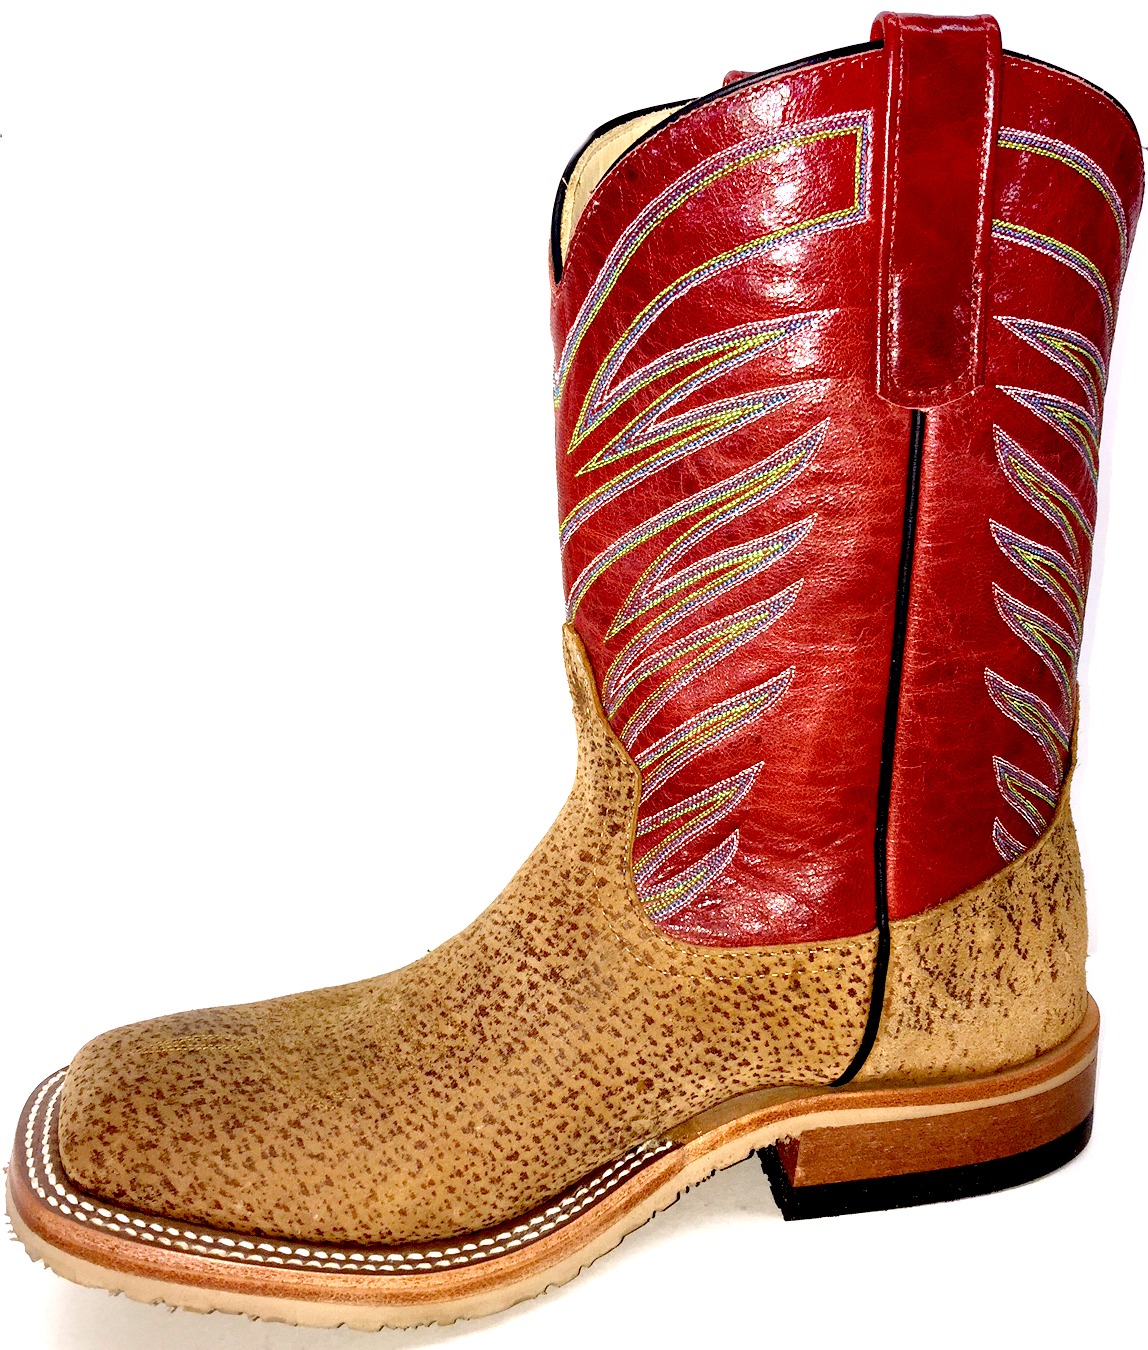 Buy > mens crepe sole cowboy boots > in stock